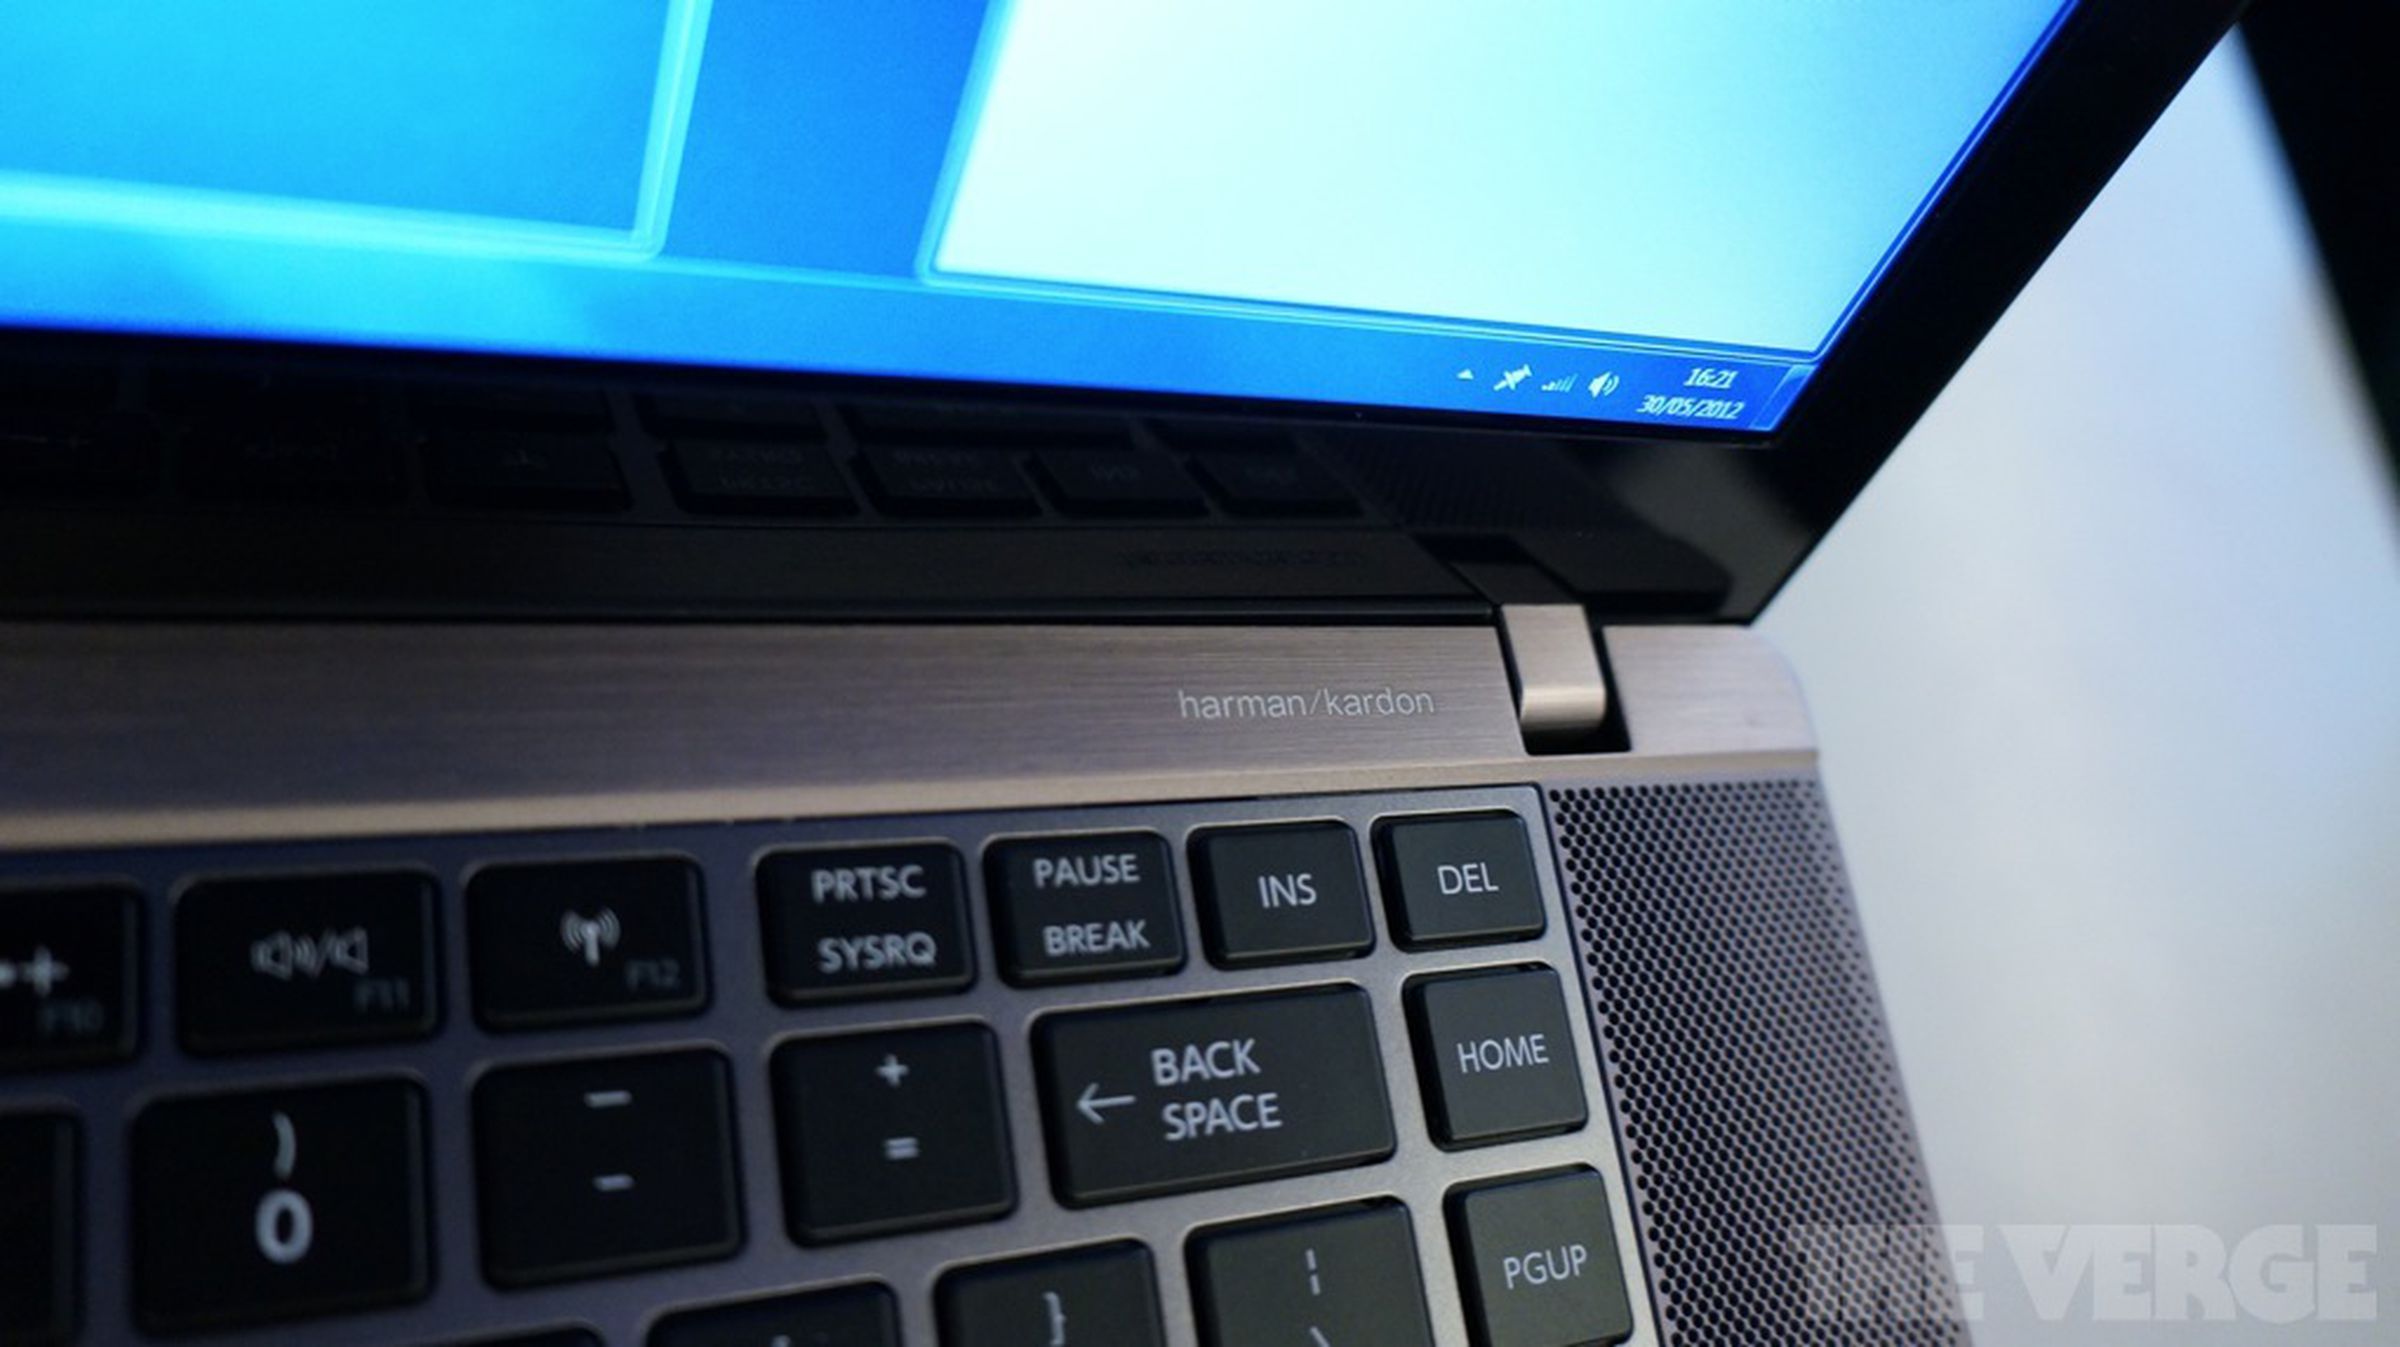 Toshiba Satellite U840W hands-on pictures